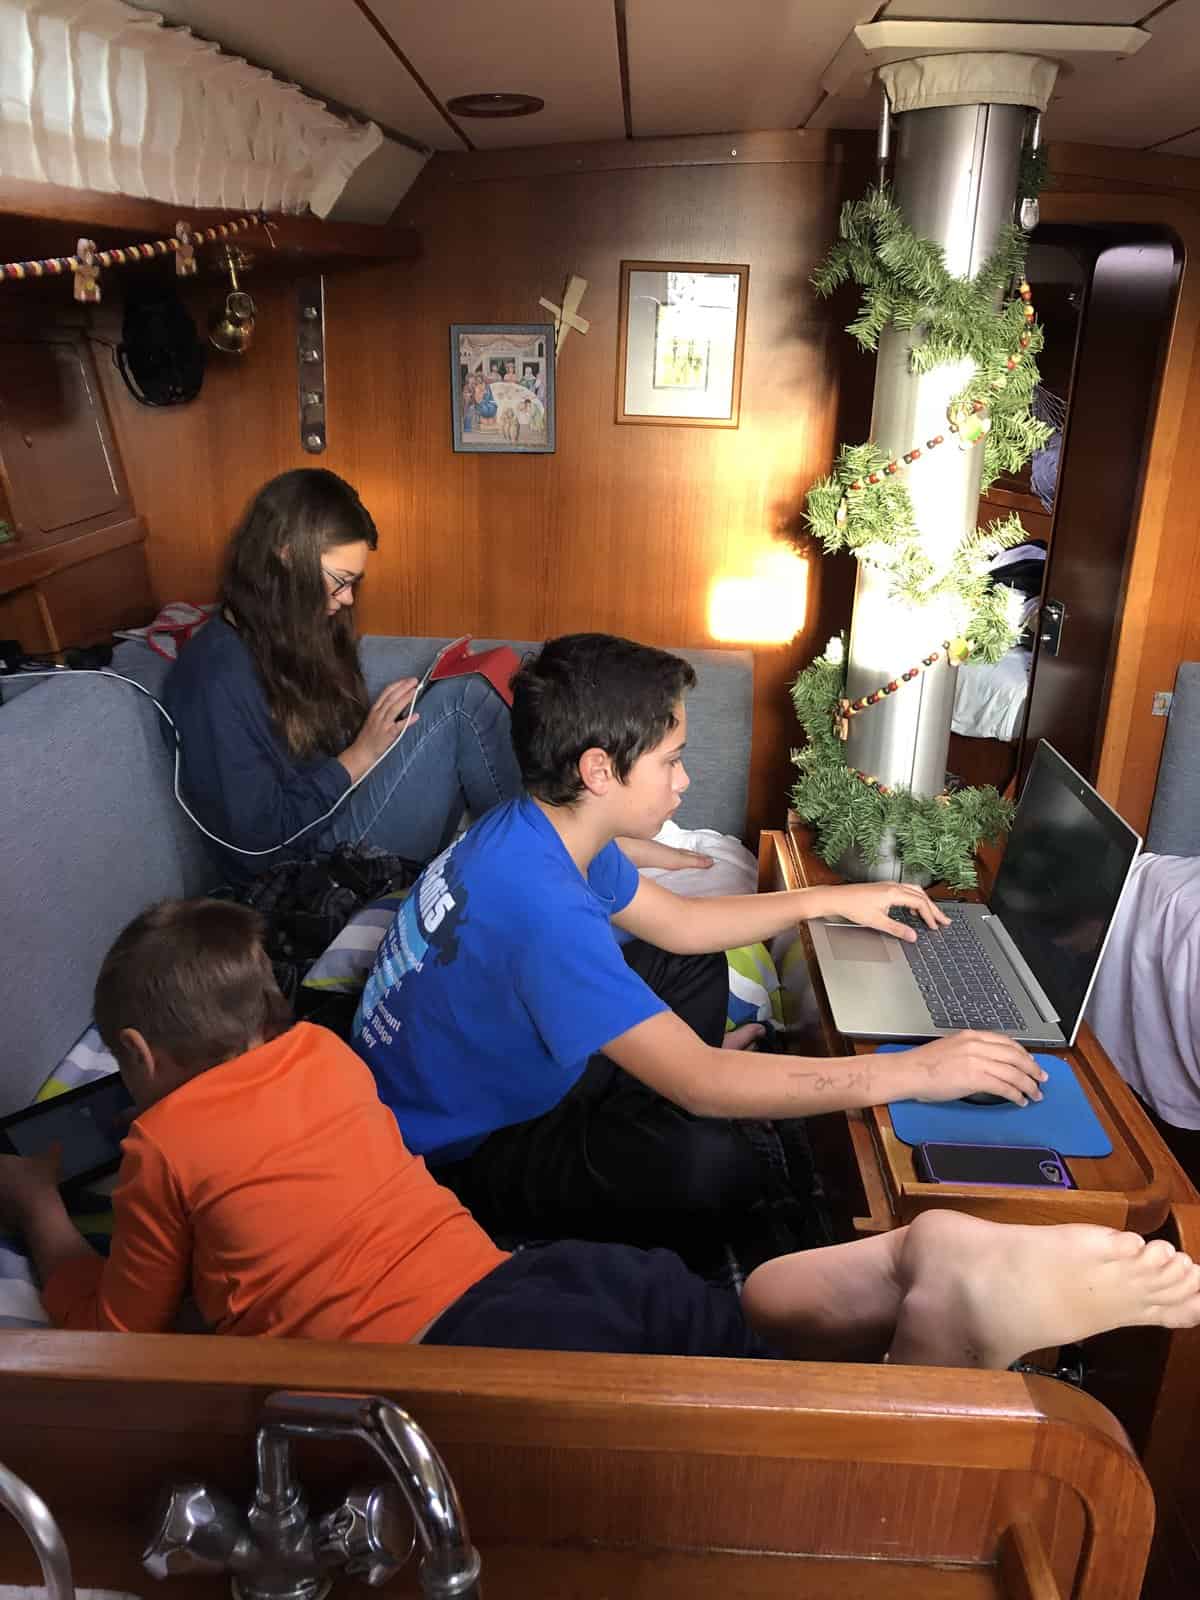 kids on their devices, in the salon, on a sailboat
